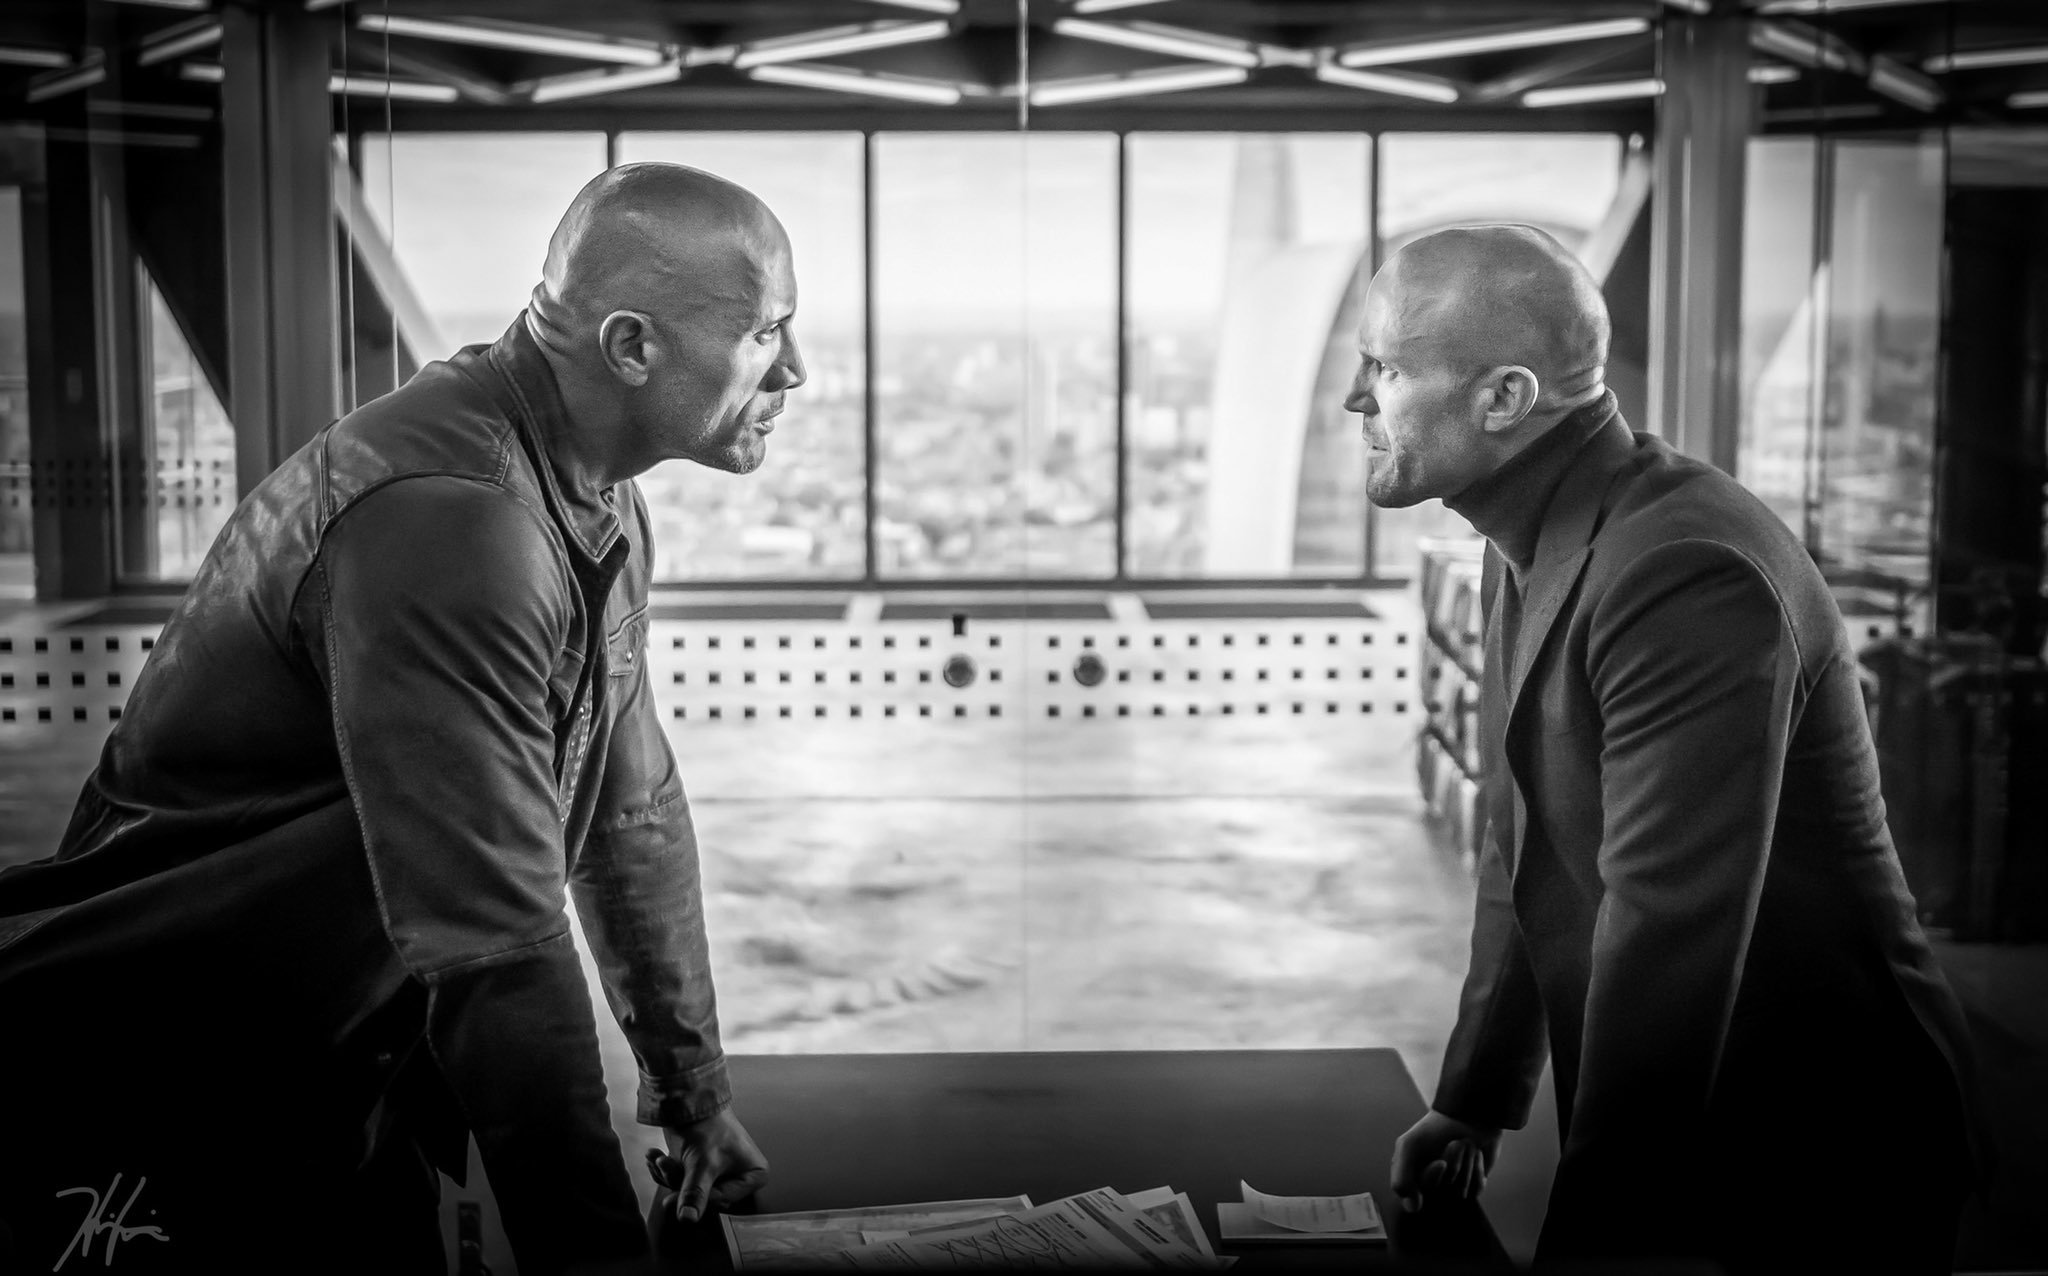 1920x1080 Hobbs And Shaw 2019 Laptop Full HD 1080P HD 4k Wallpapers, Images ...2048 x 1276